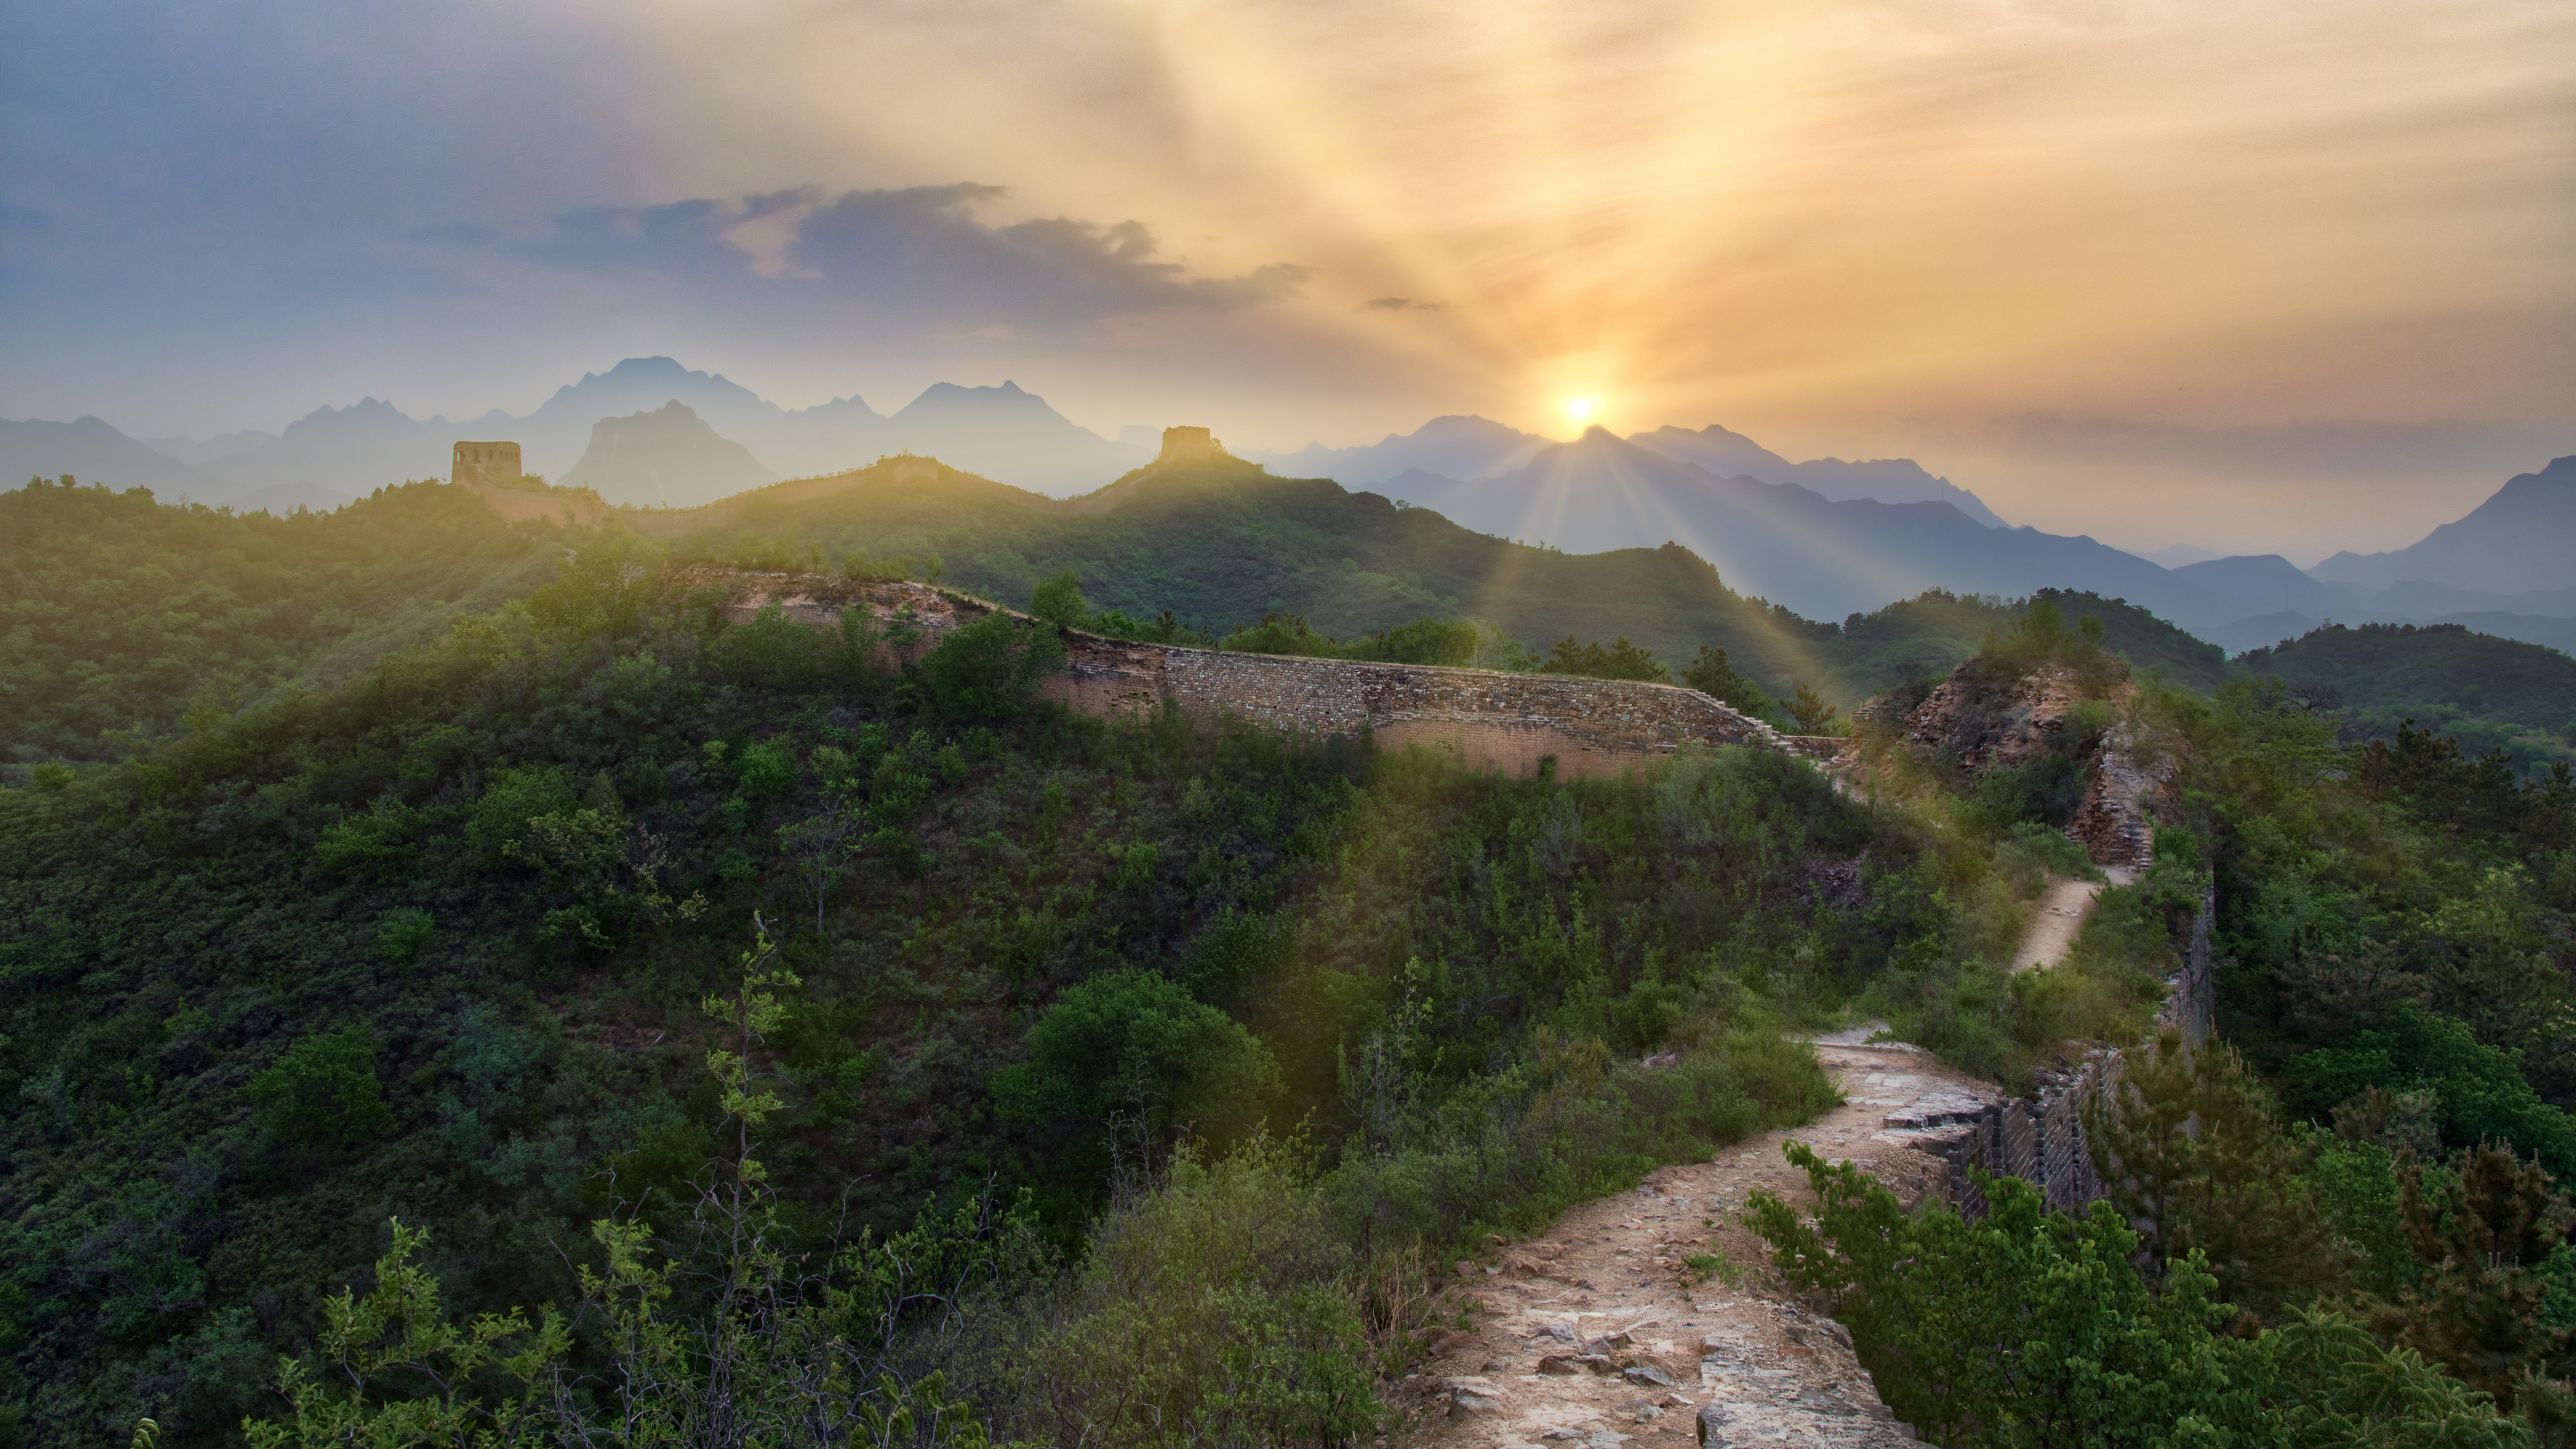 General 3840x2160 landscape 4K mountains hills forest Sun Great Wall of China nature sun rays